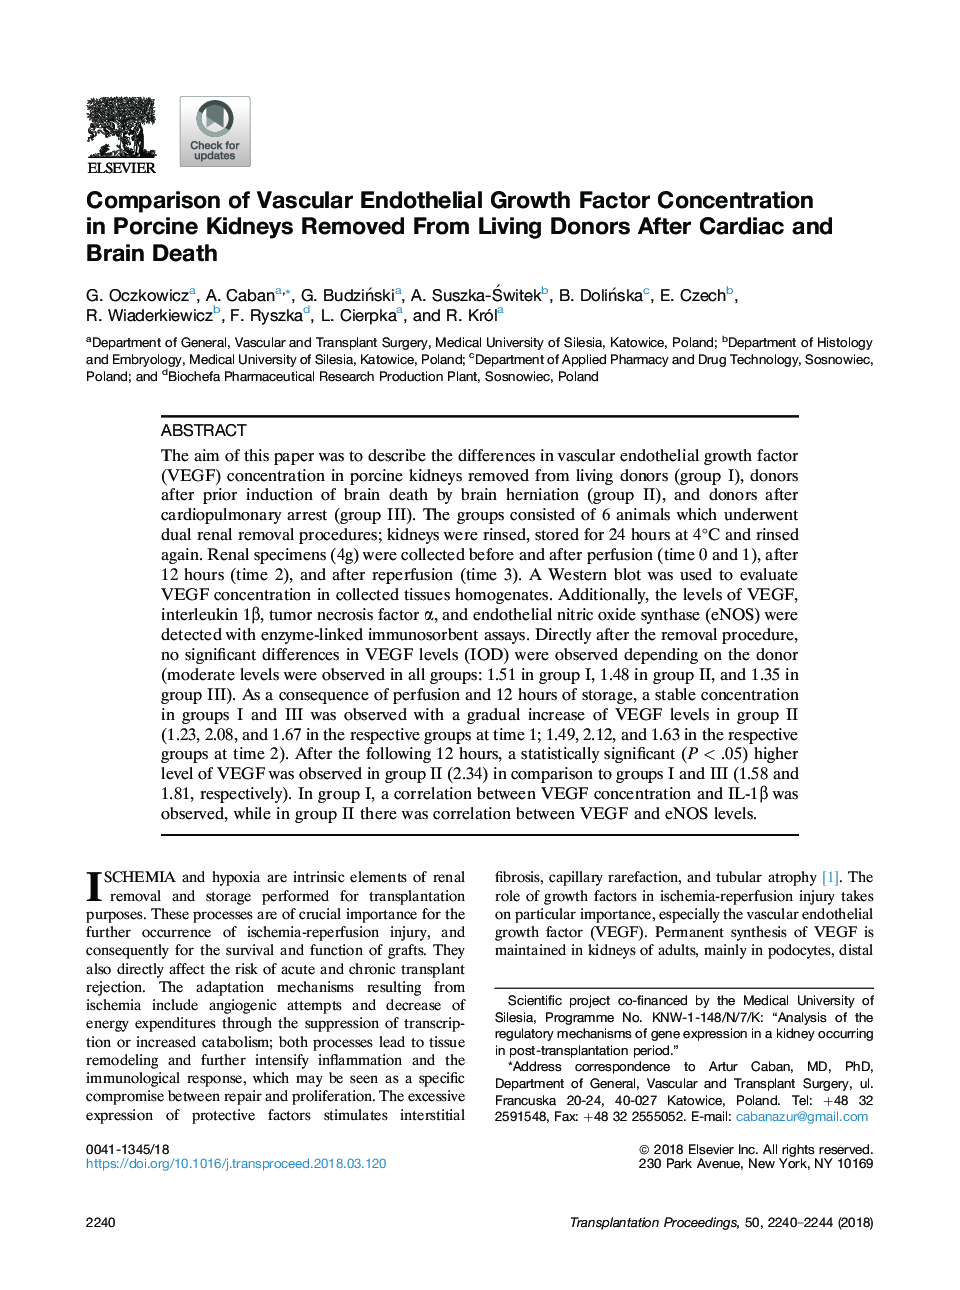 Comparison of Vascular Endothelial Growth Factor Concentration in Porcine Kidneys Removed From Living Donors After Cardiac and Brain Death